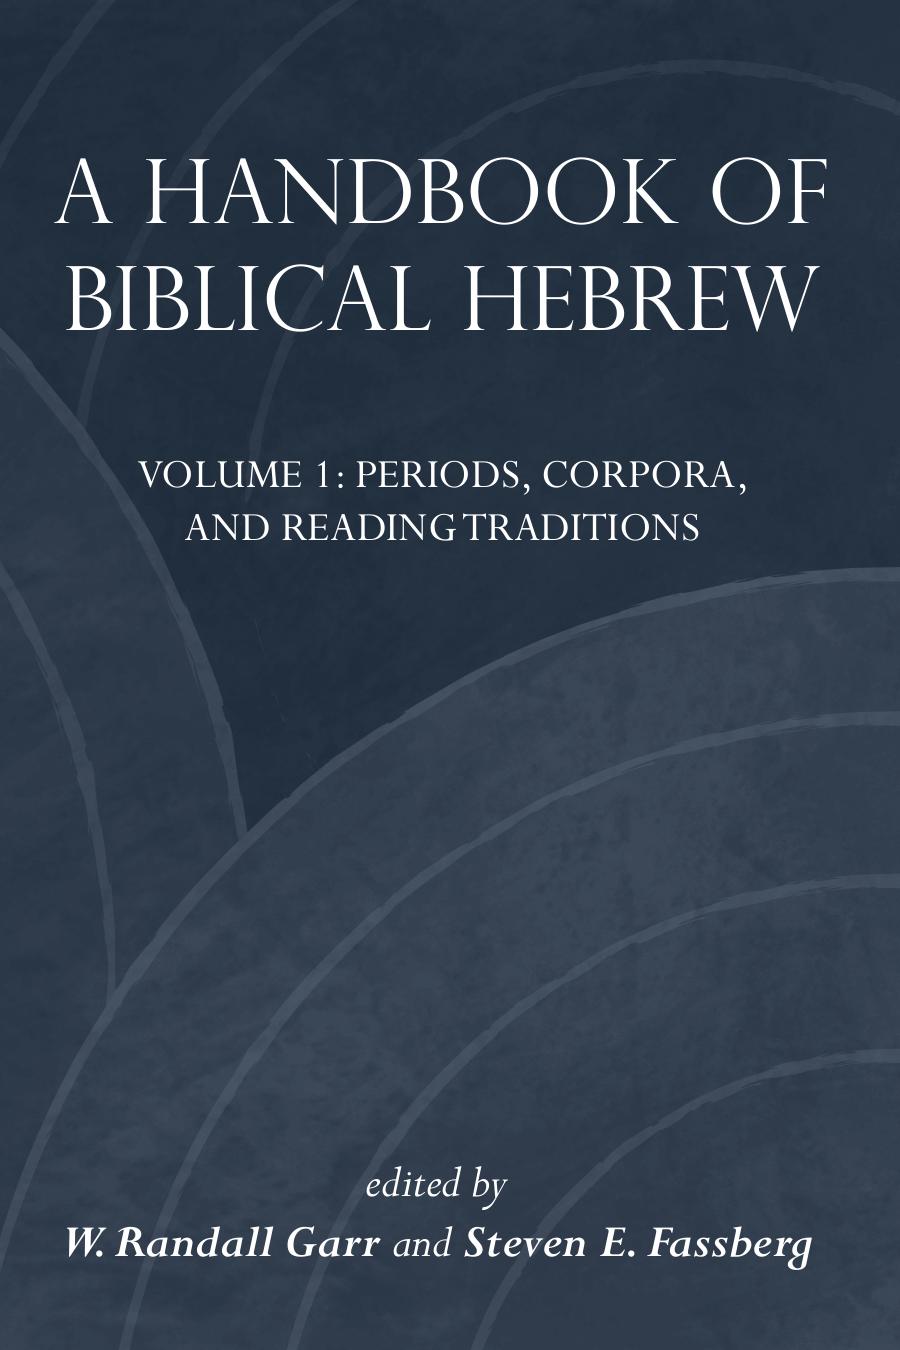 A Handbook of Biblical Hebrew: Volume 1: Periods, Corpora, and Reading Traditions Volume 2: Selected Texts by W. Randall Garr Steven E. Fassberg